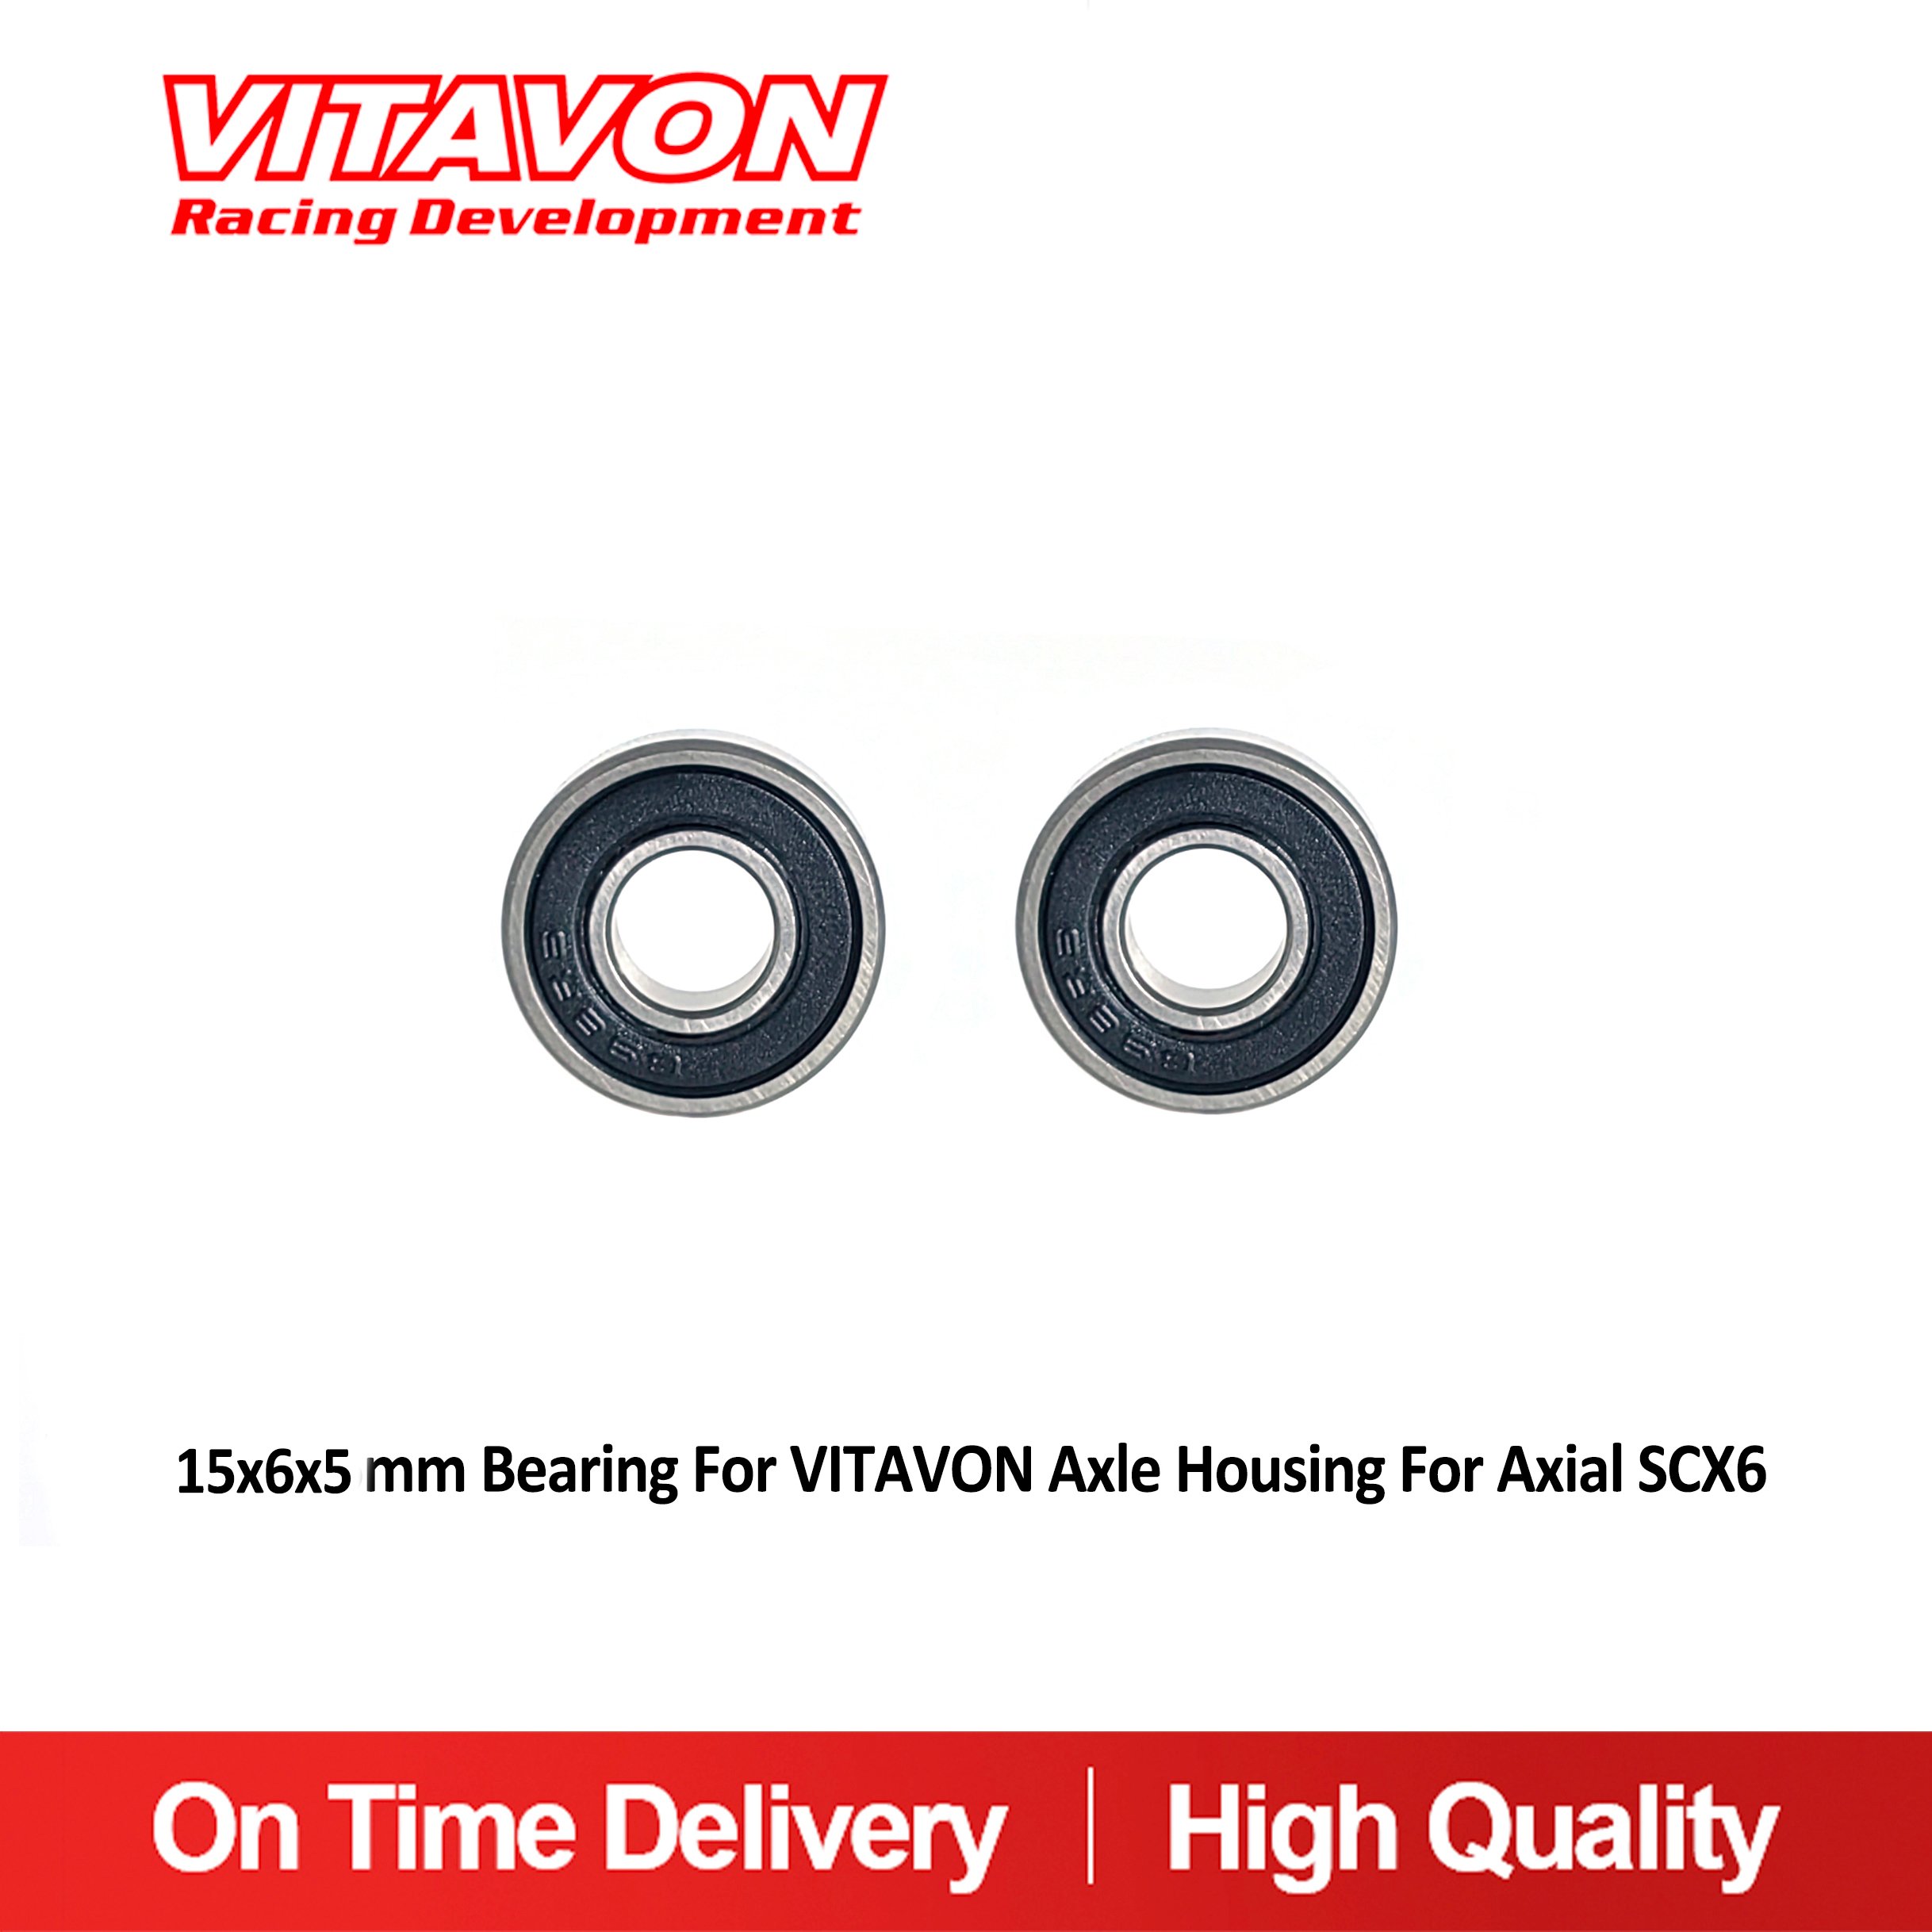 Bearing For VITAVON Axle Housing For Axial SCX6